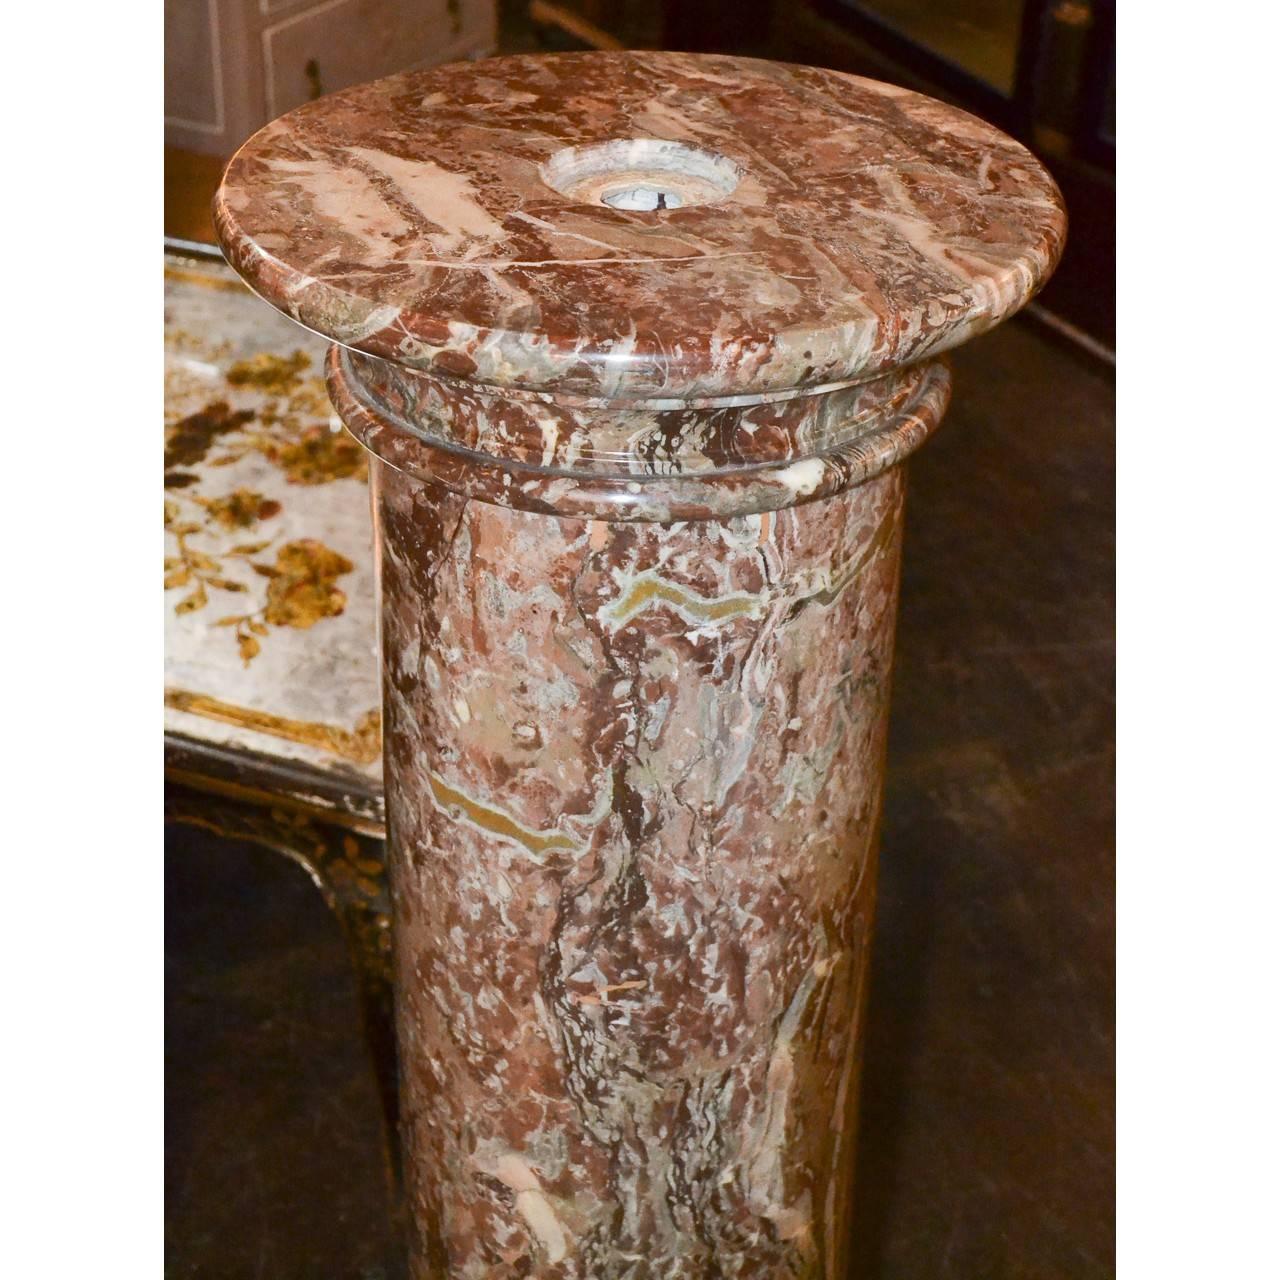 Substantial 19th century marble pedestal from France.

Measure: 40 inches height x 17 inches wide
top 14.5 inches.